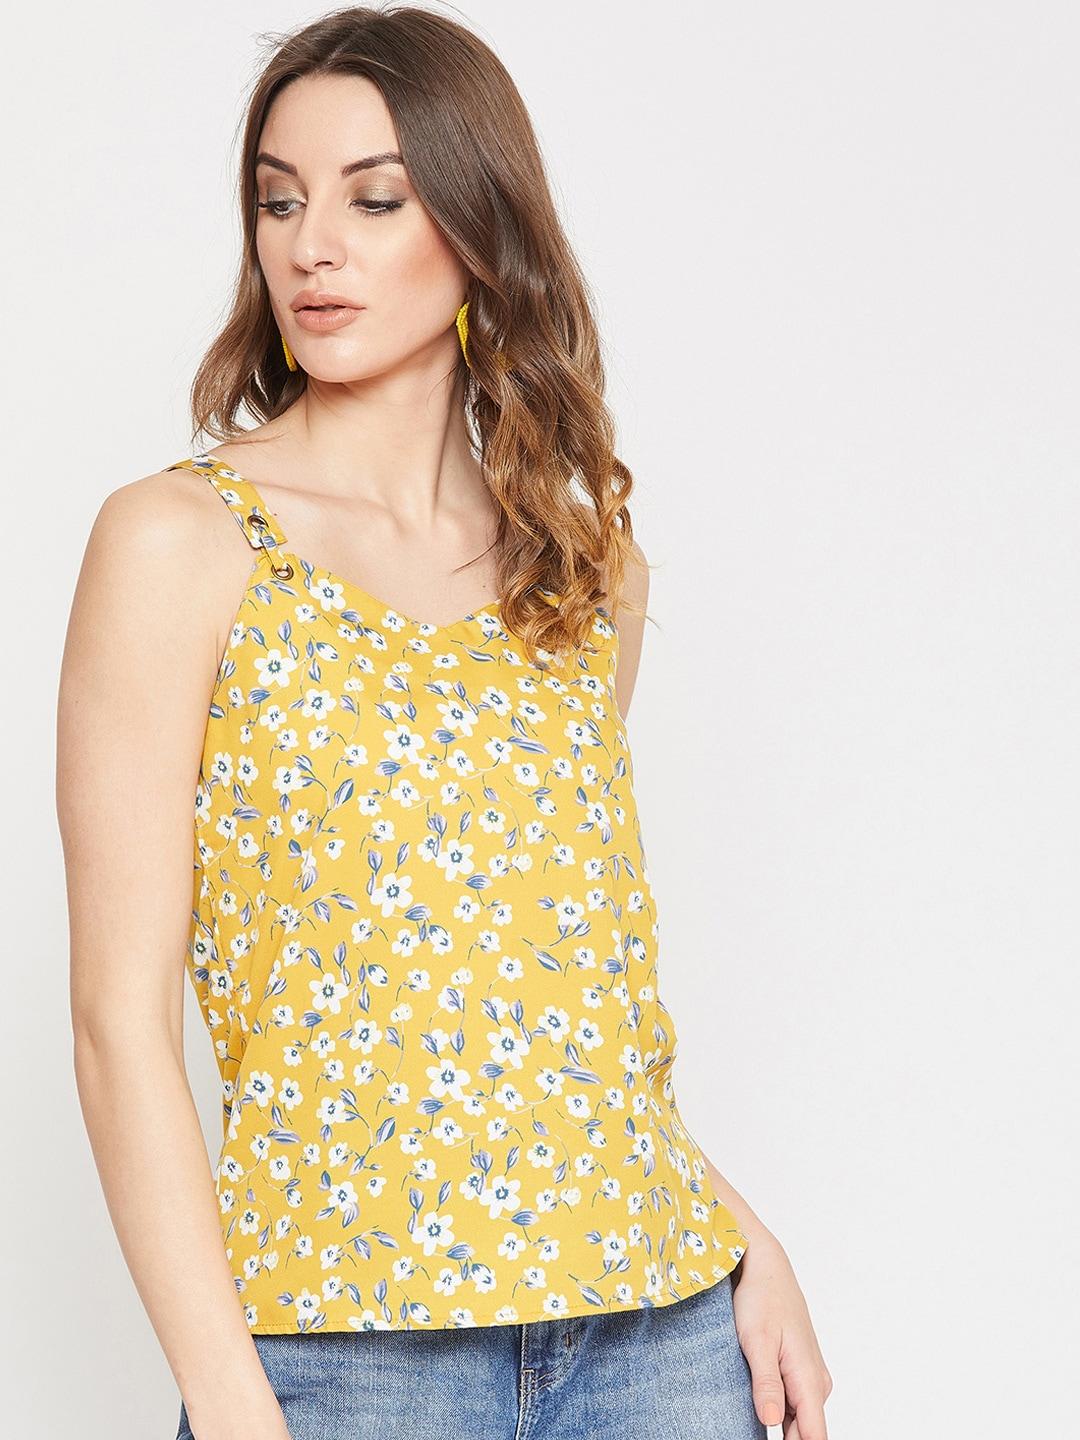 marie-claire-women-yellow-printed-top